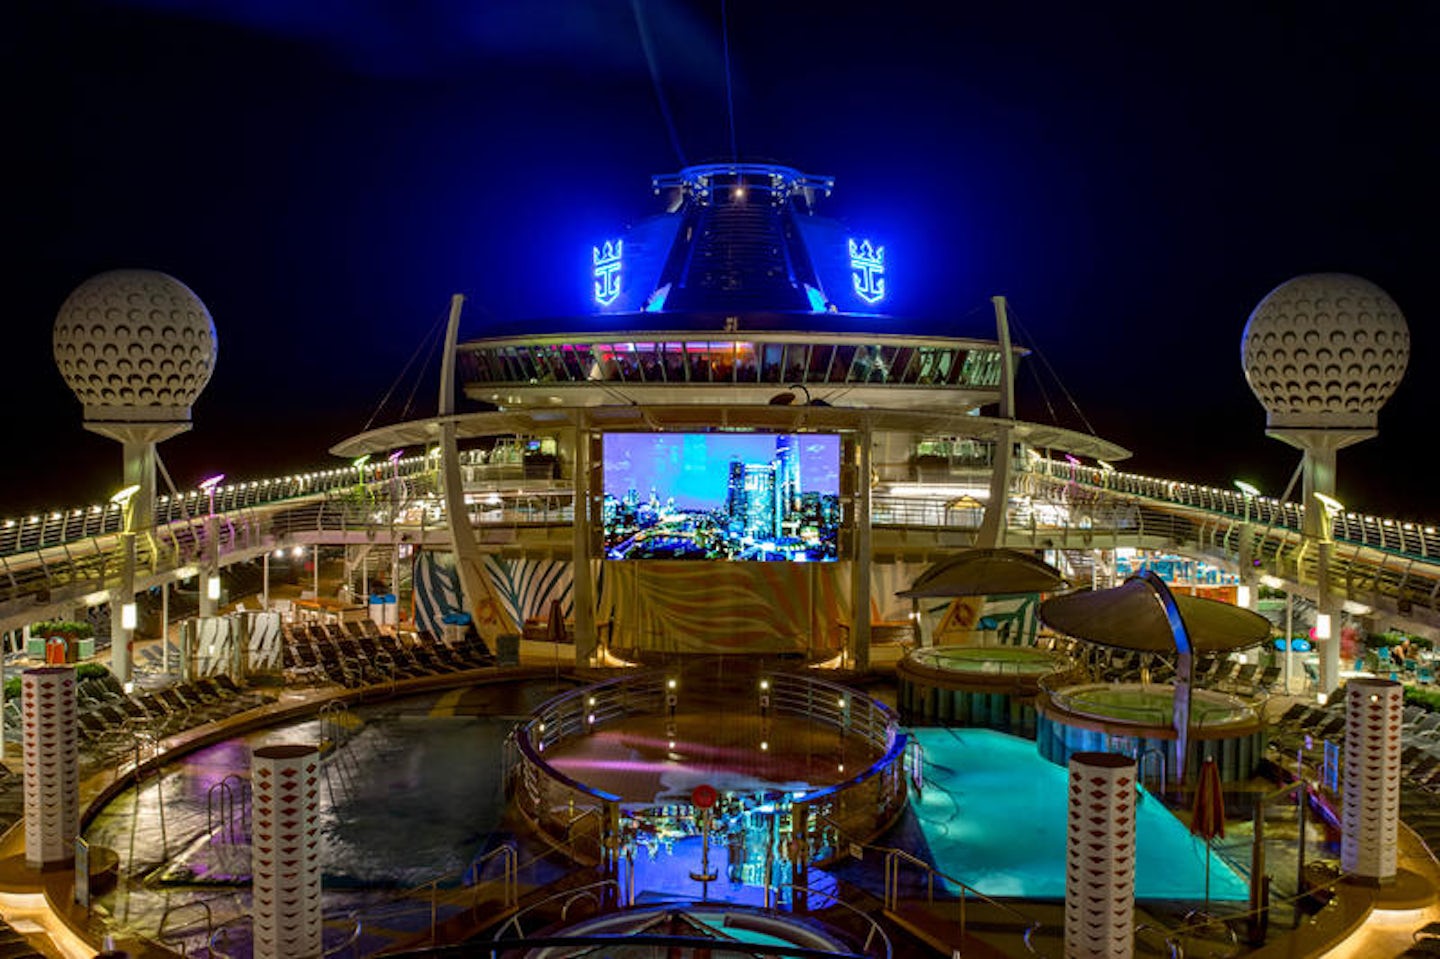 Main Pool on Independence of the Seas